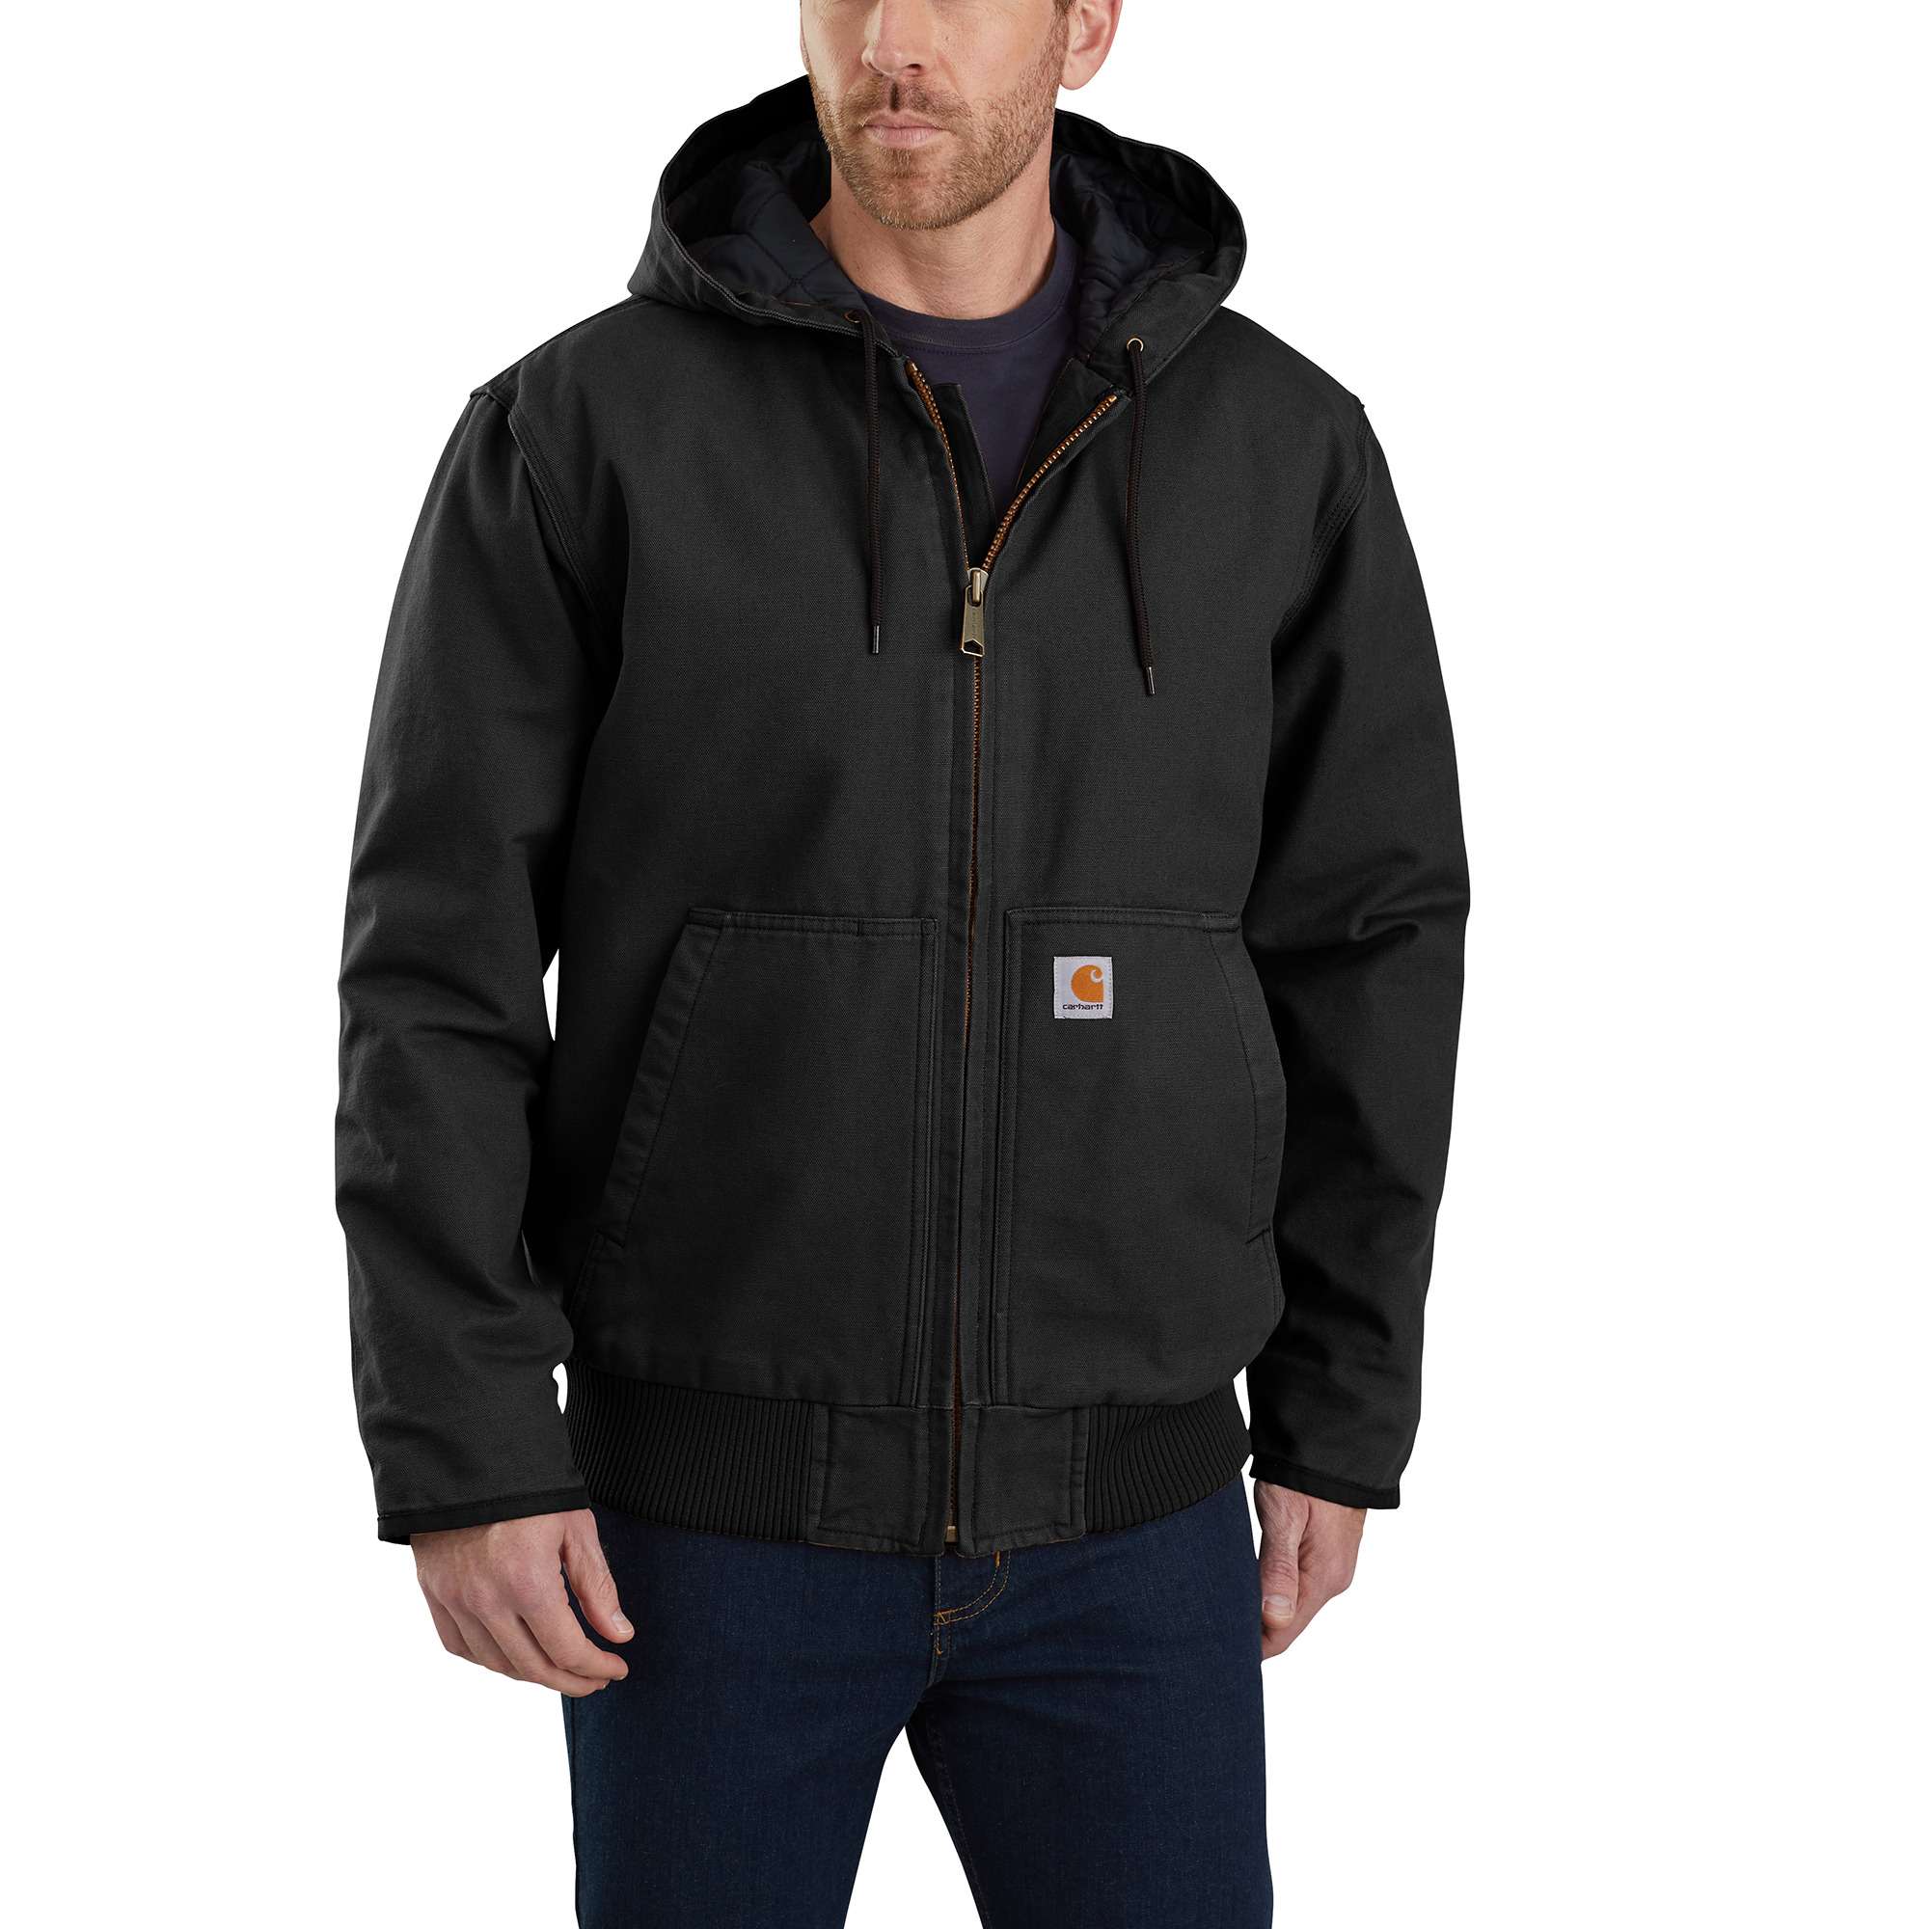 Men's Insulated Active Jac - Loose Fit Washed Duck 3 Warmest Rating